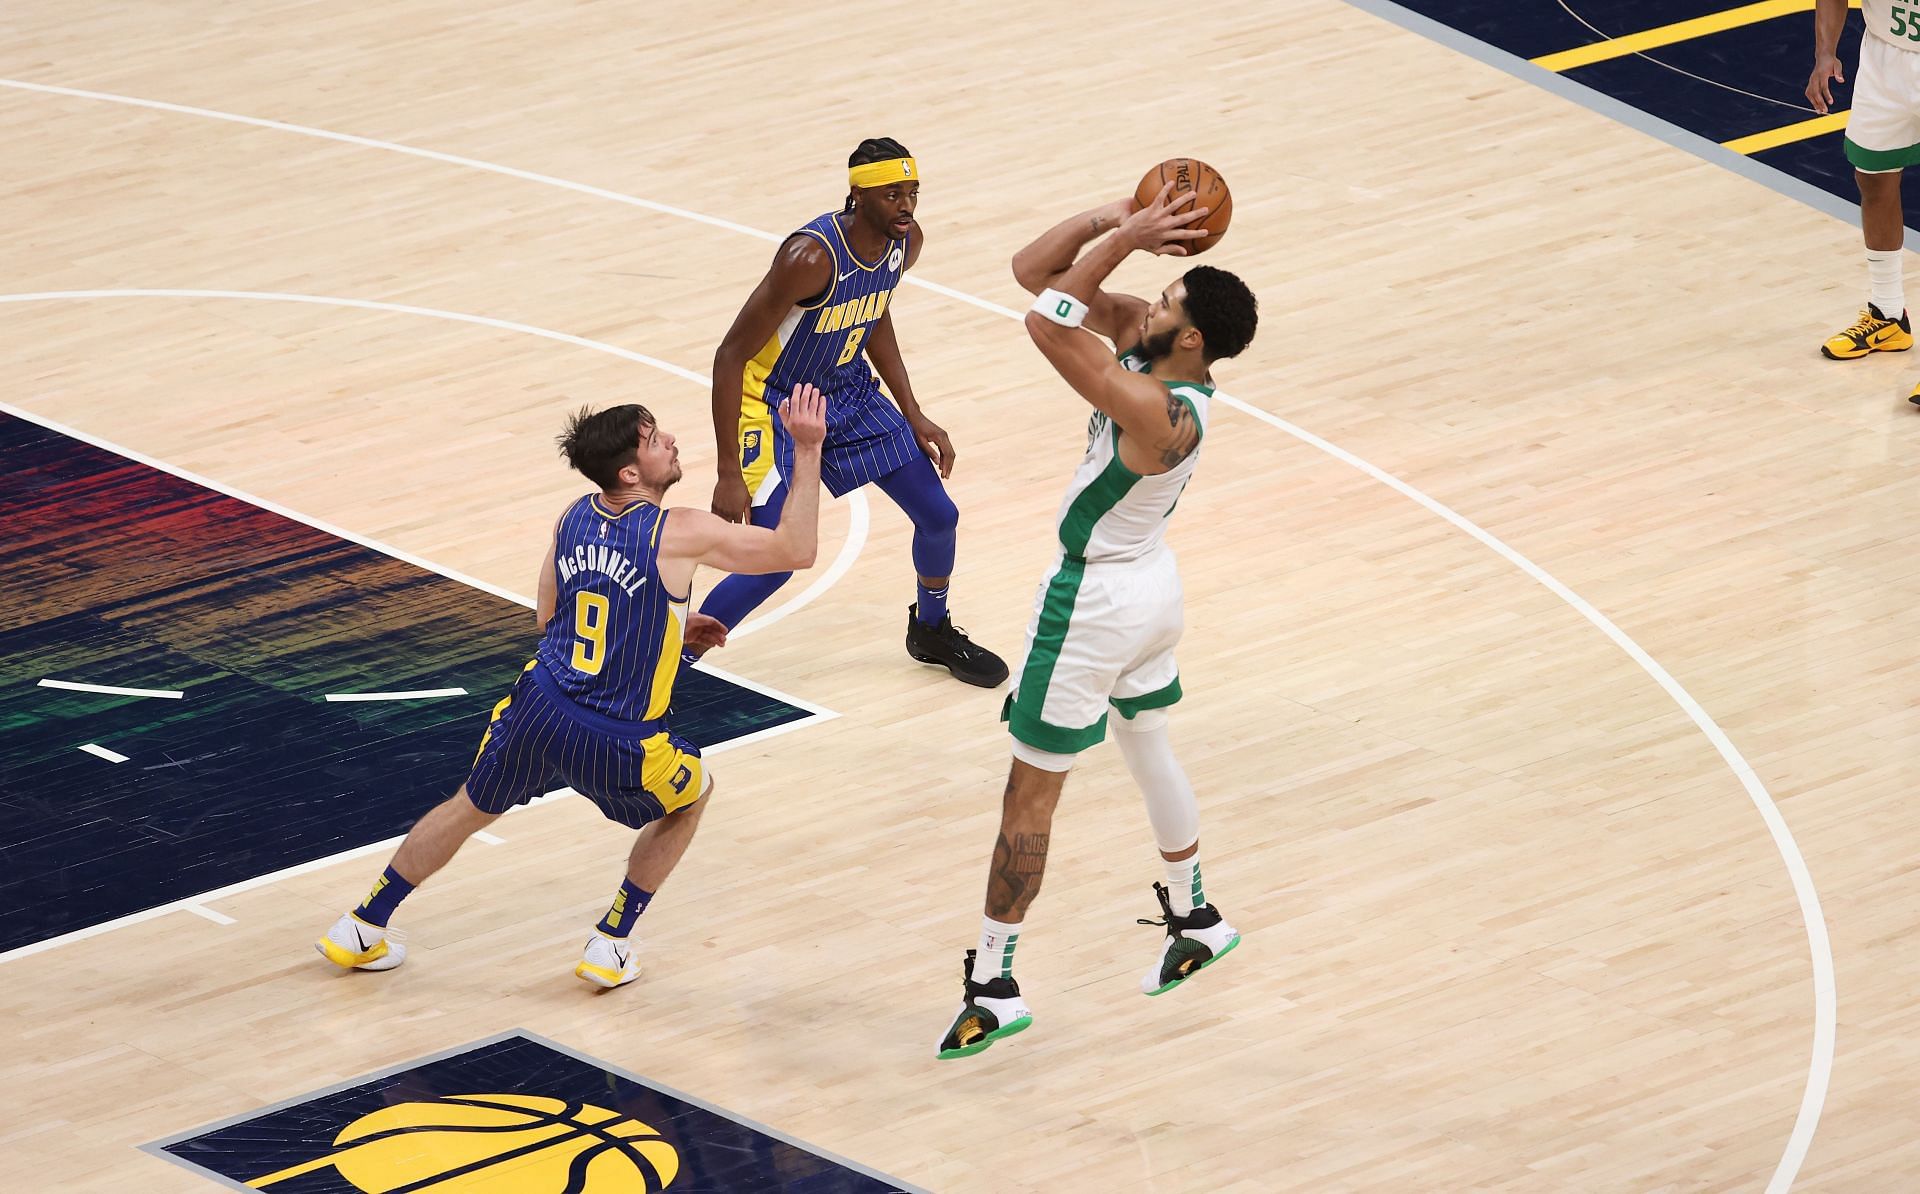 Boston Celtics will play against the Indiana Pacers on Sunday.